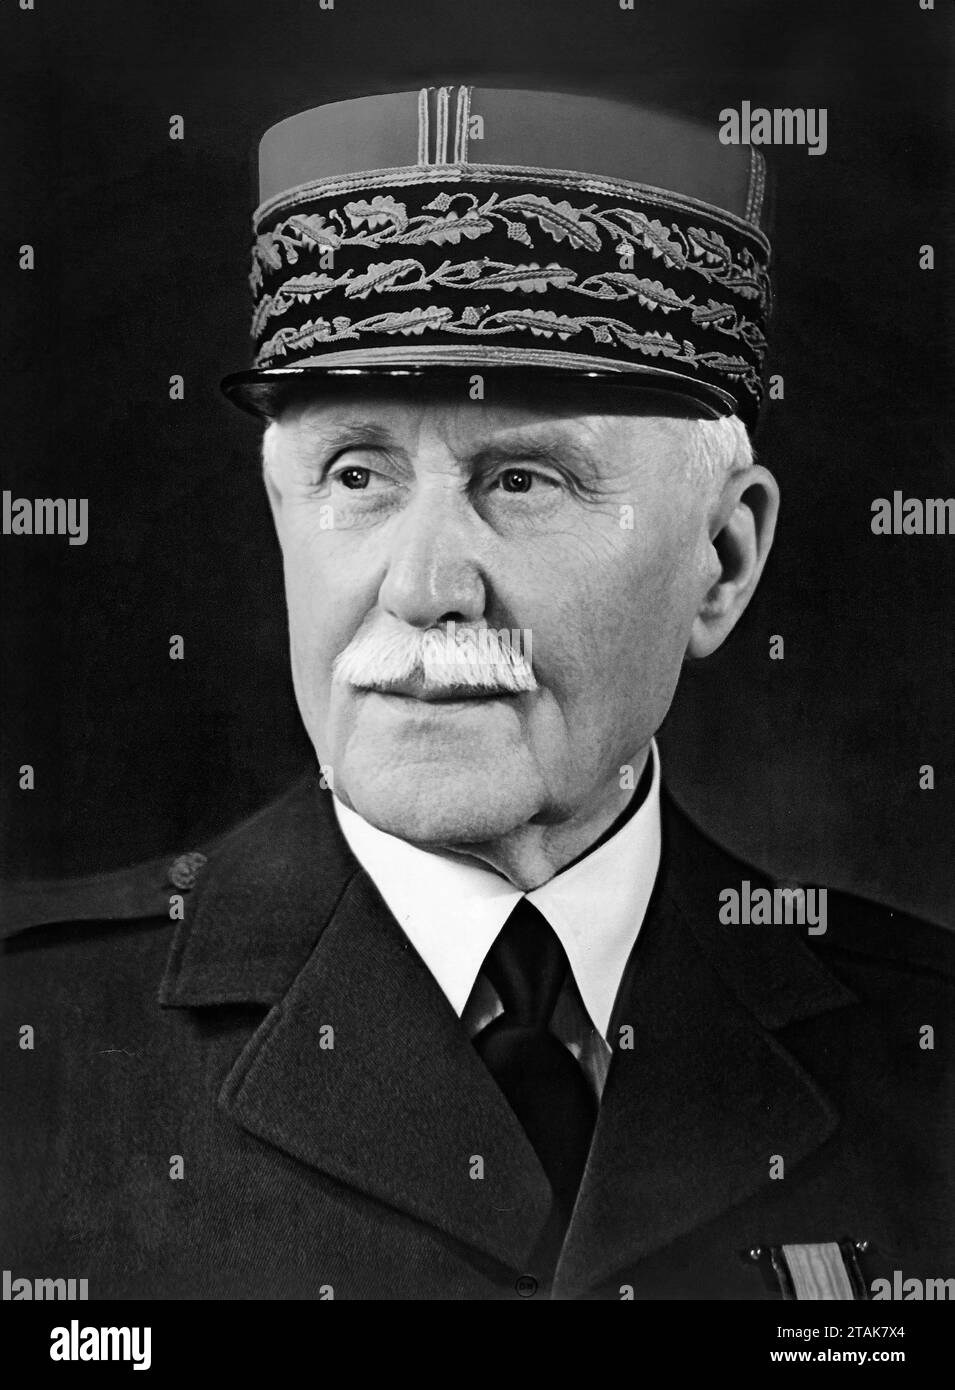 Philippe Petain. Portrait of the head of the collaborationist regime of Vichy France, Henri Philippe Benoni Omer Pétain (Marshal Petain: 1856-1951), official portrait, c. 1941 Stock Photo